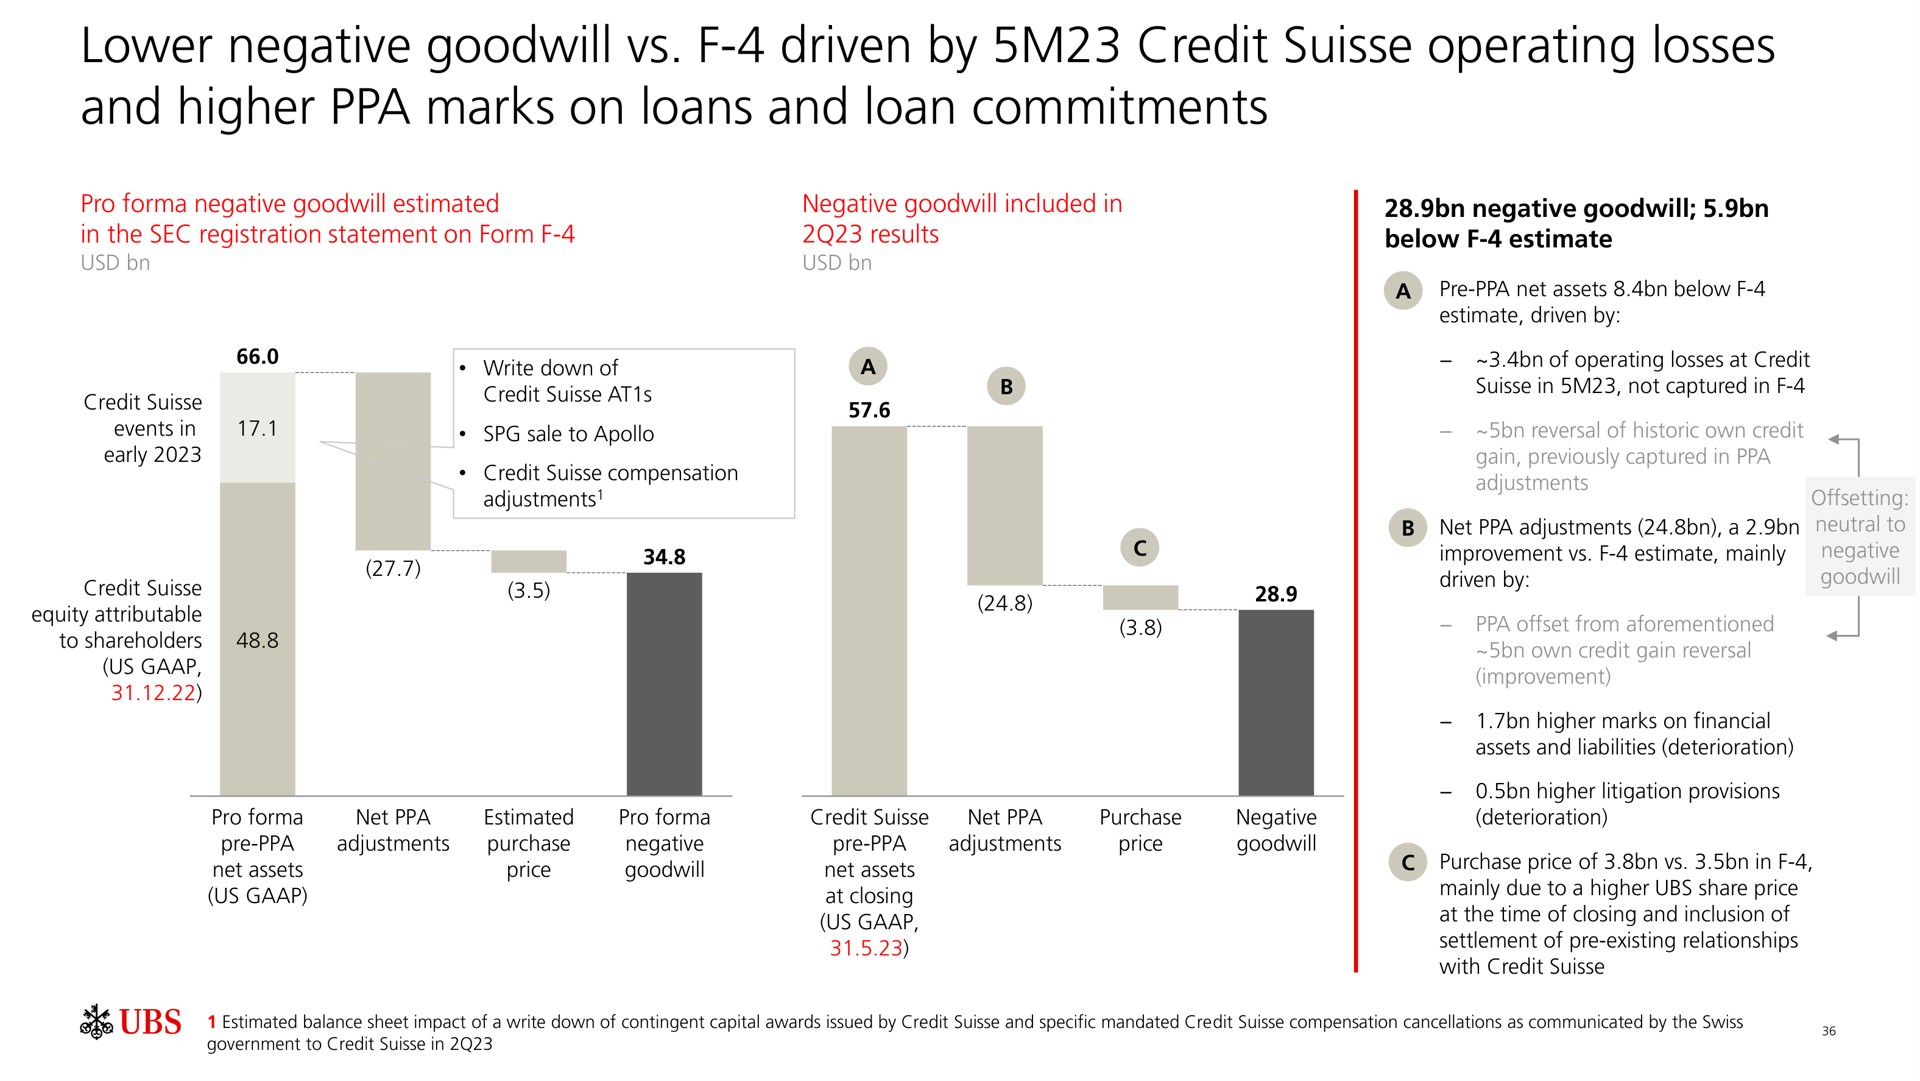 lower negative goodwill driven by credit operating losses and higher marks on loans and loan commitments | UBS